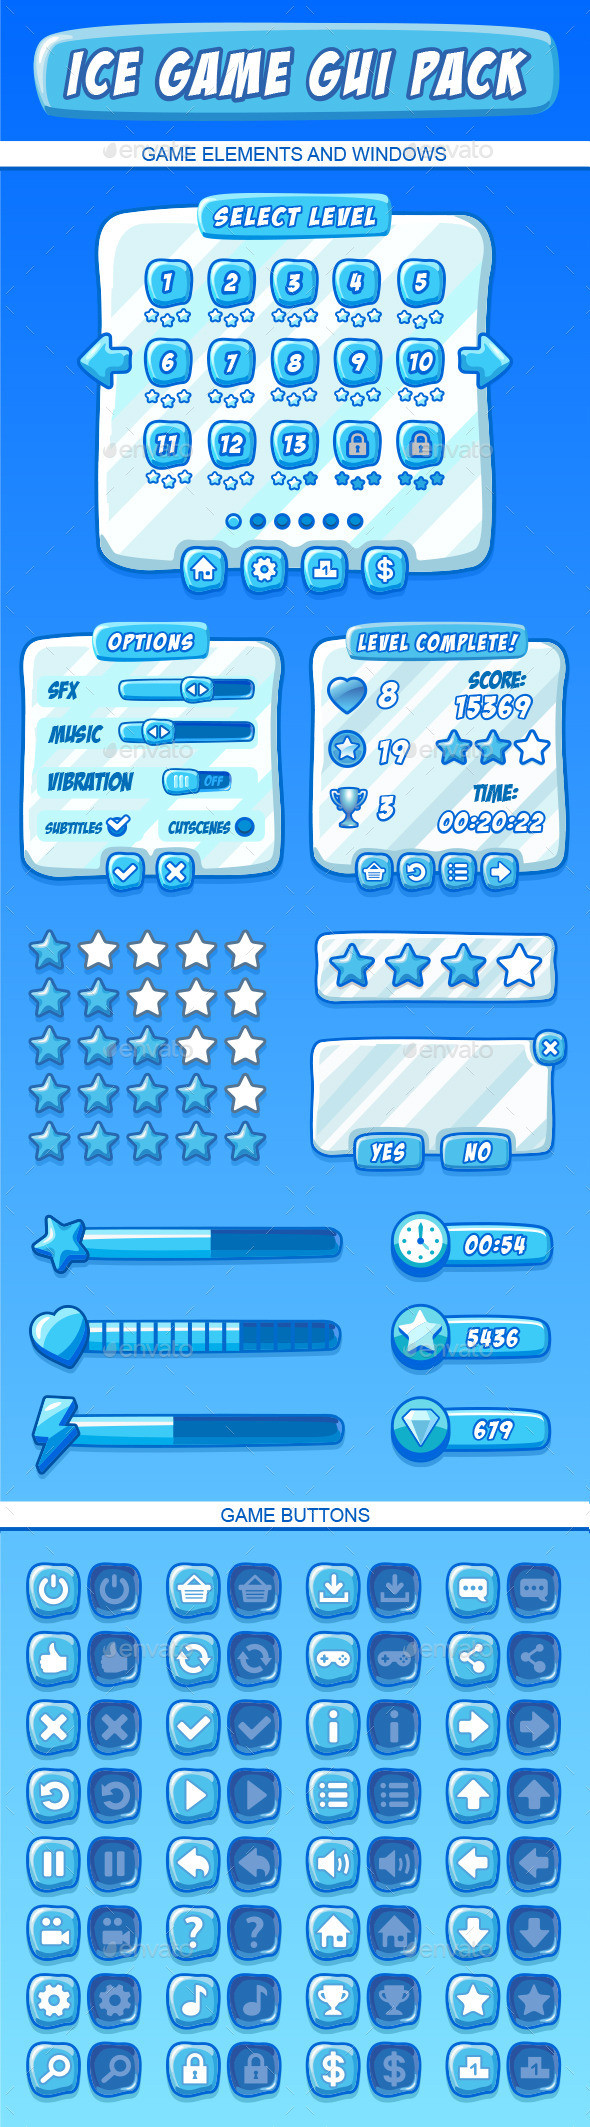 Ice game gui pack preview